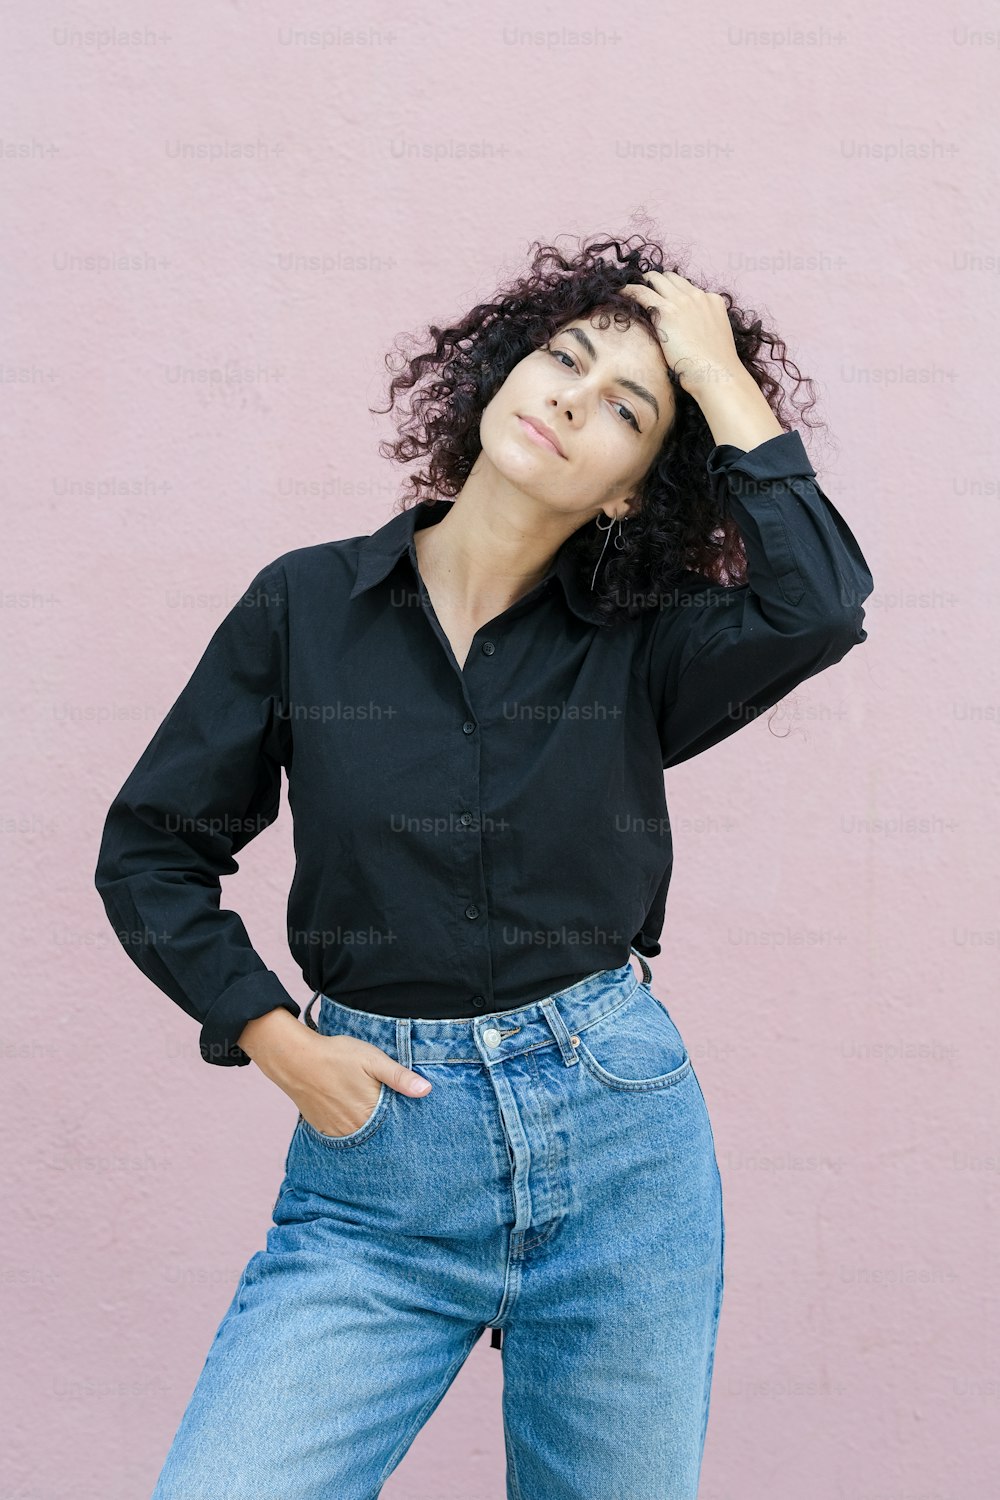 a woman with curly hair wearing a black shirt and jeans